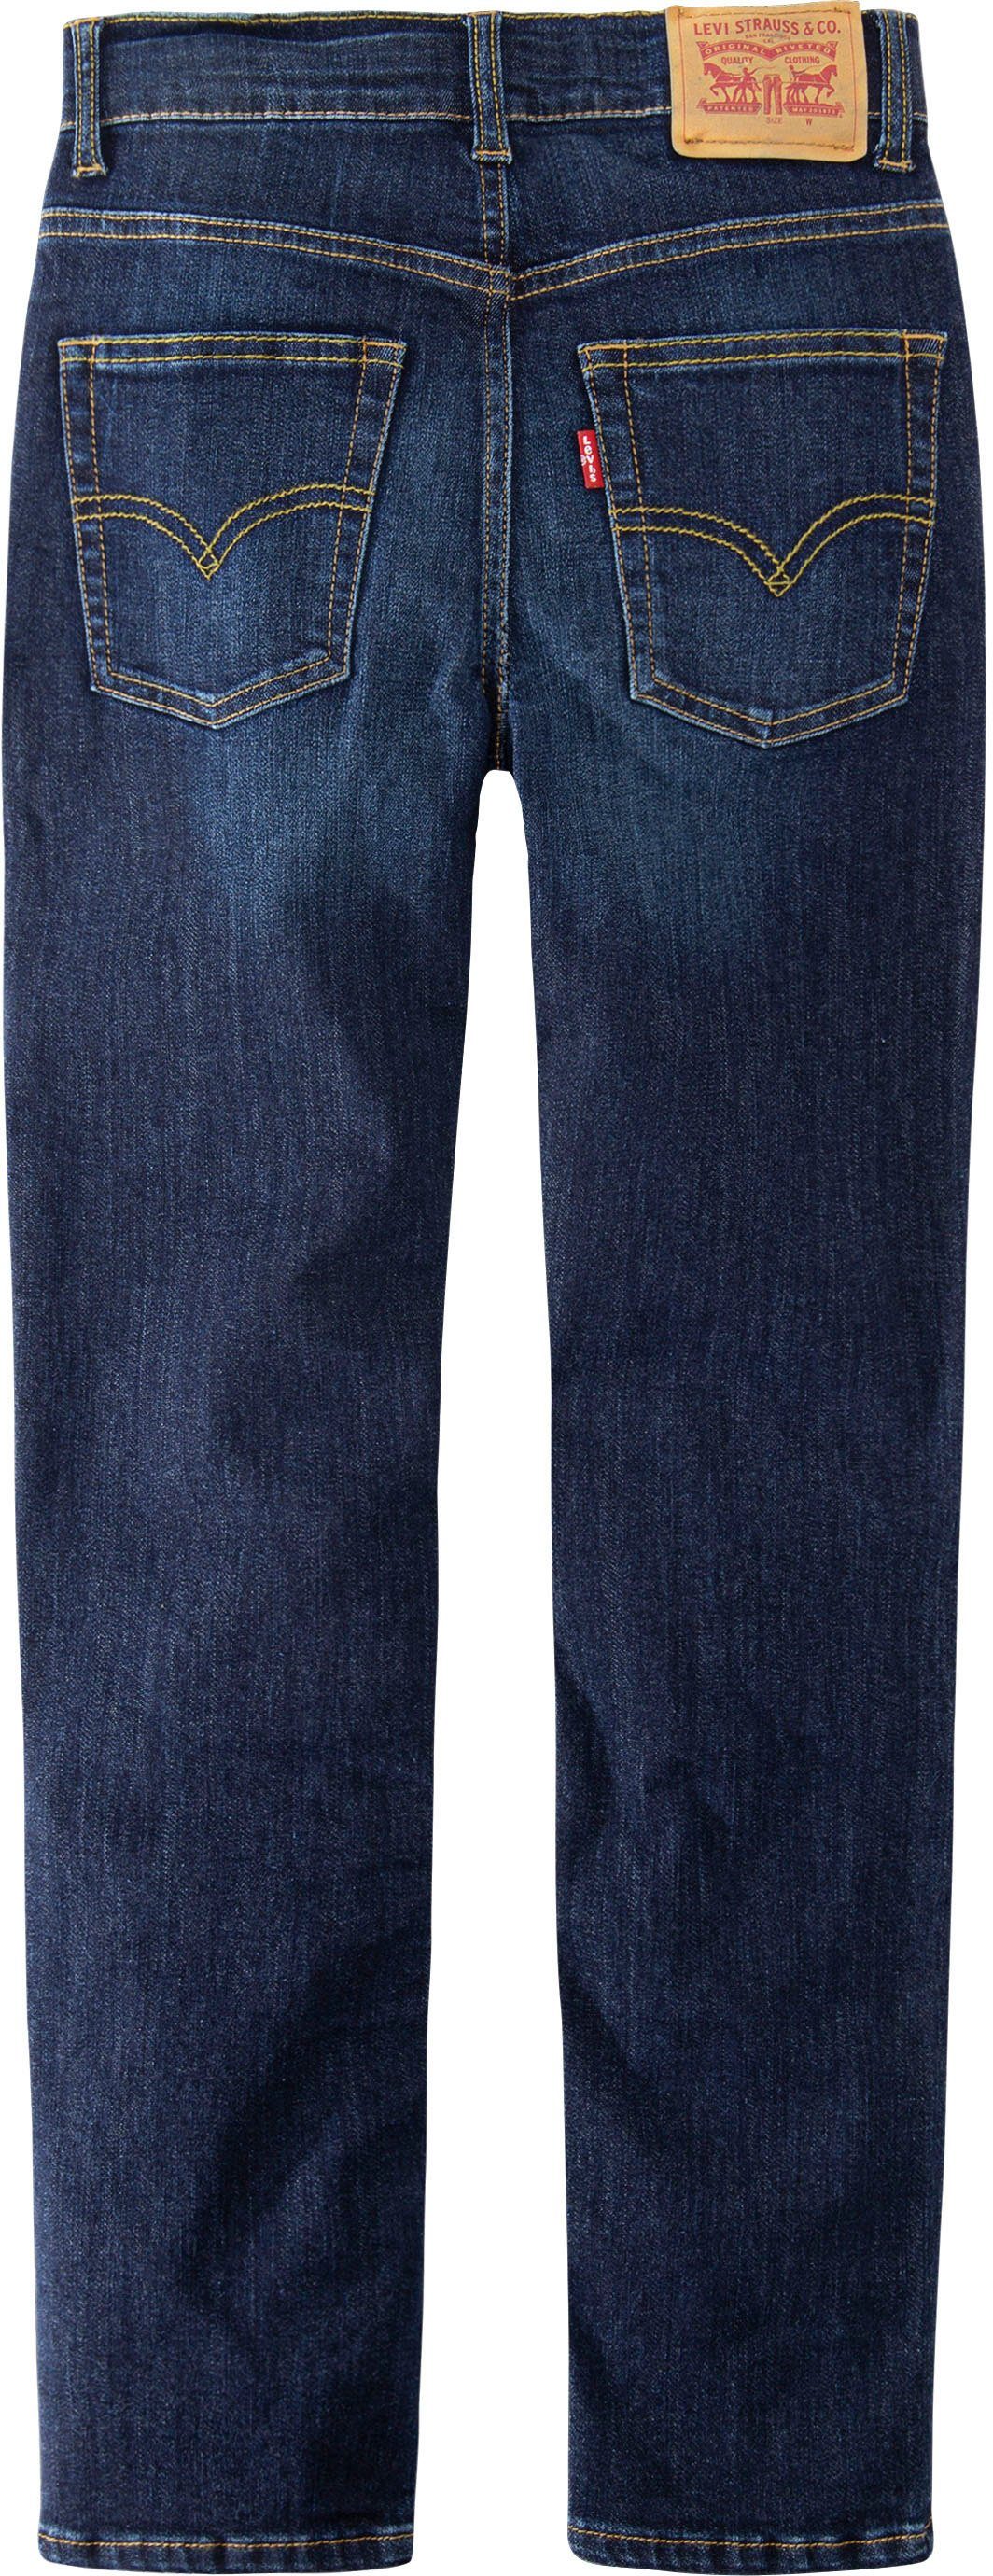 Levi's® Kids Stretch-Jeans 512 STRONG PERFORMANCE dark BOYS used blue for